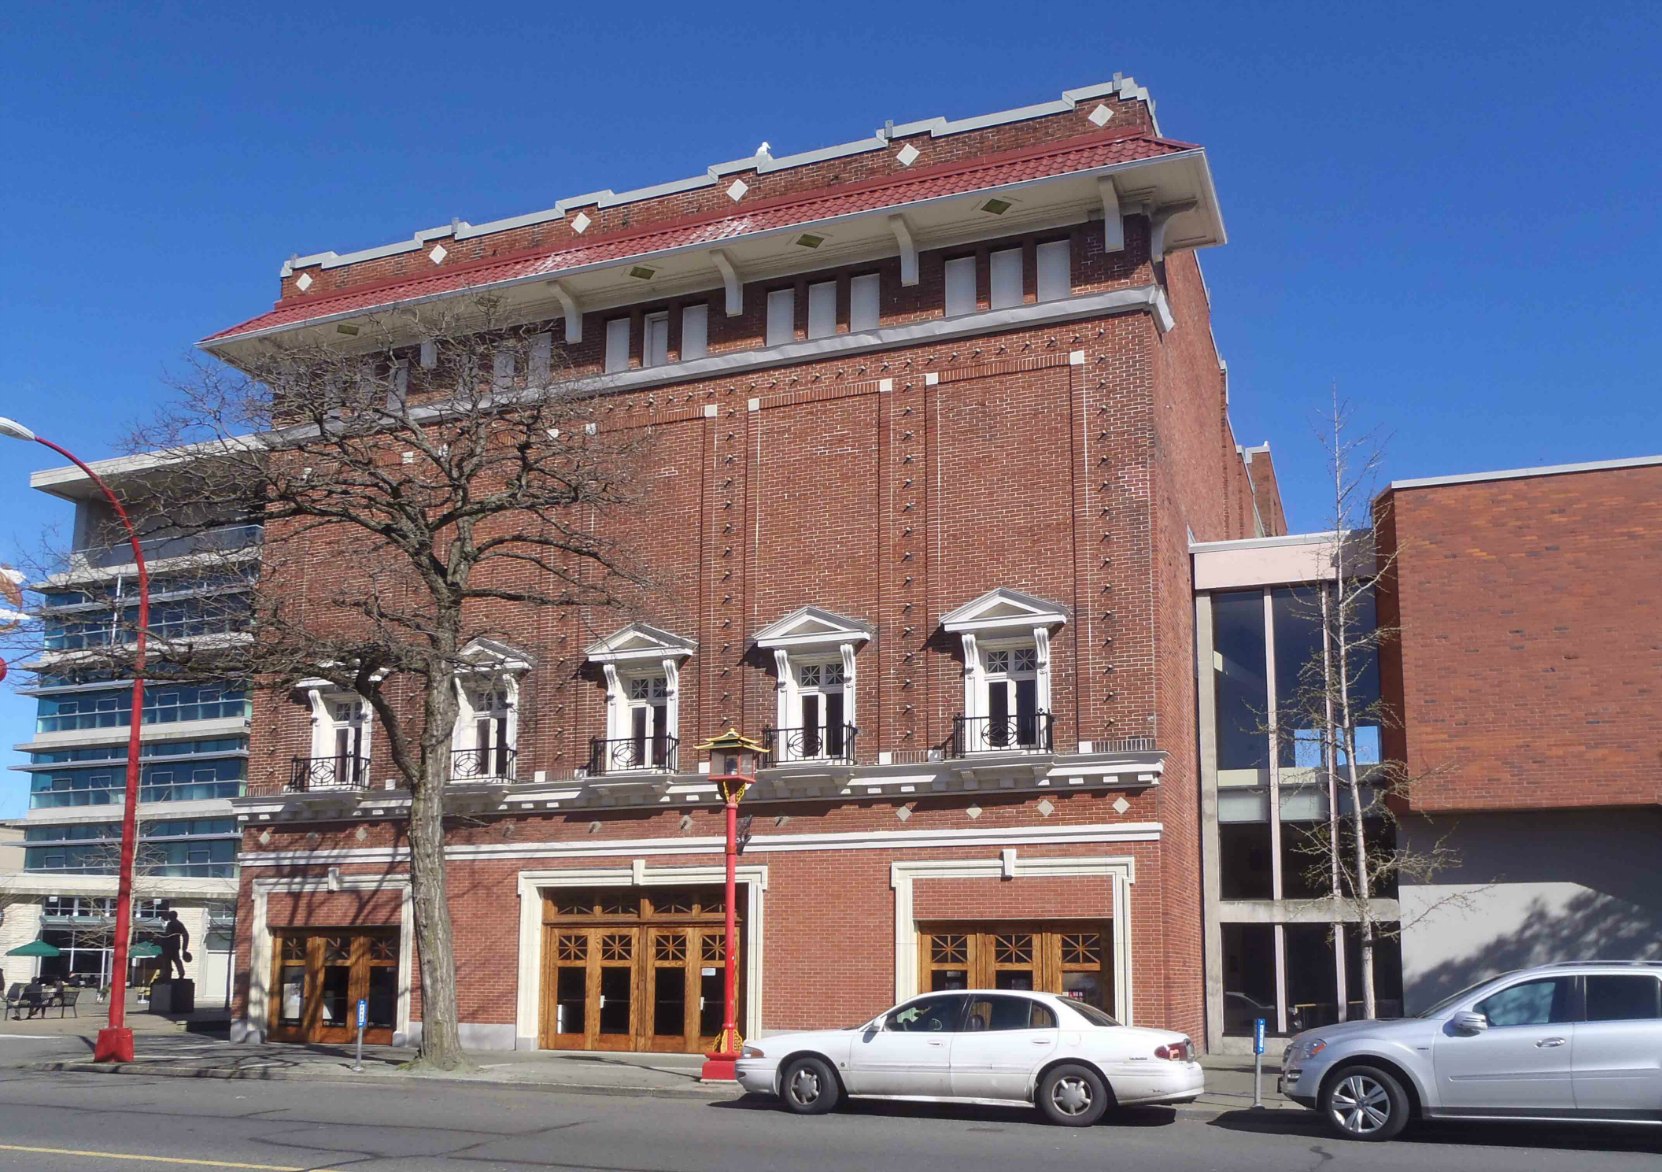 The McPherson Playhouse, 3 Centennial Square, was originally designed in 1914 as an office building by architect Jesse Warren